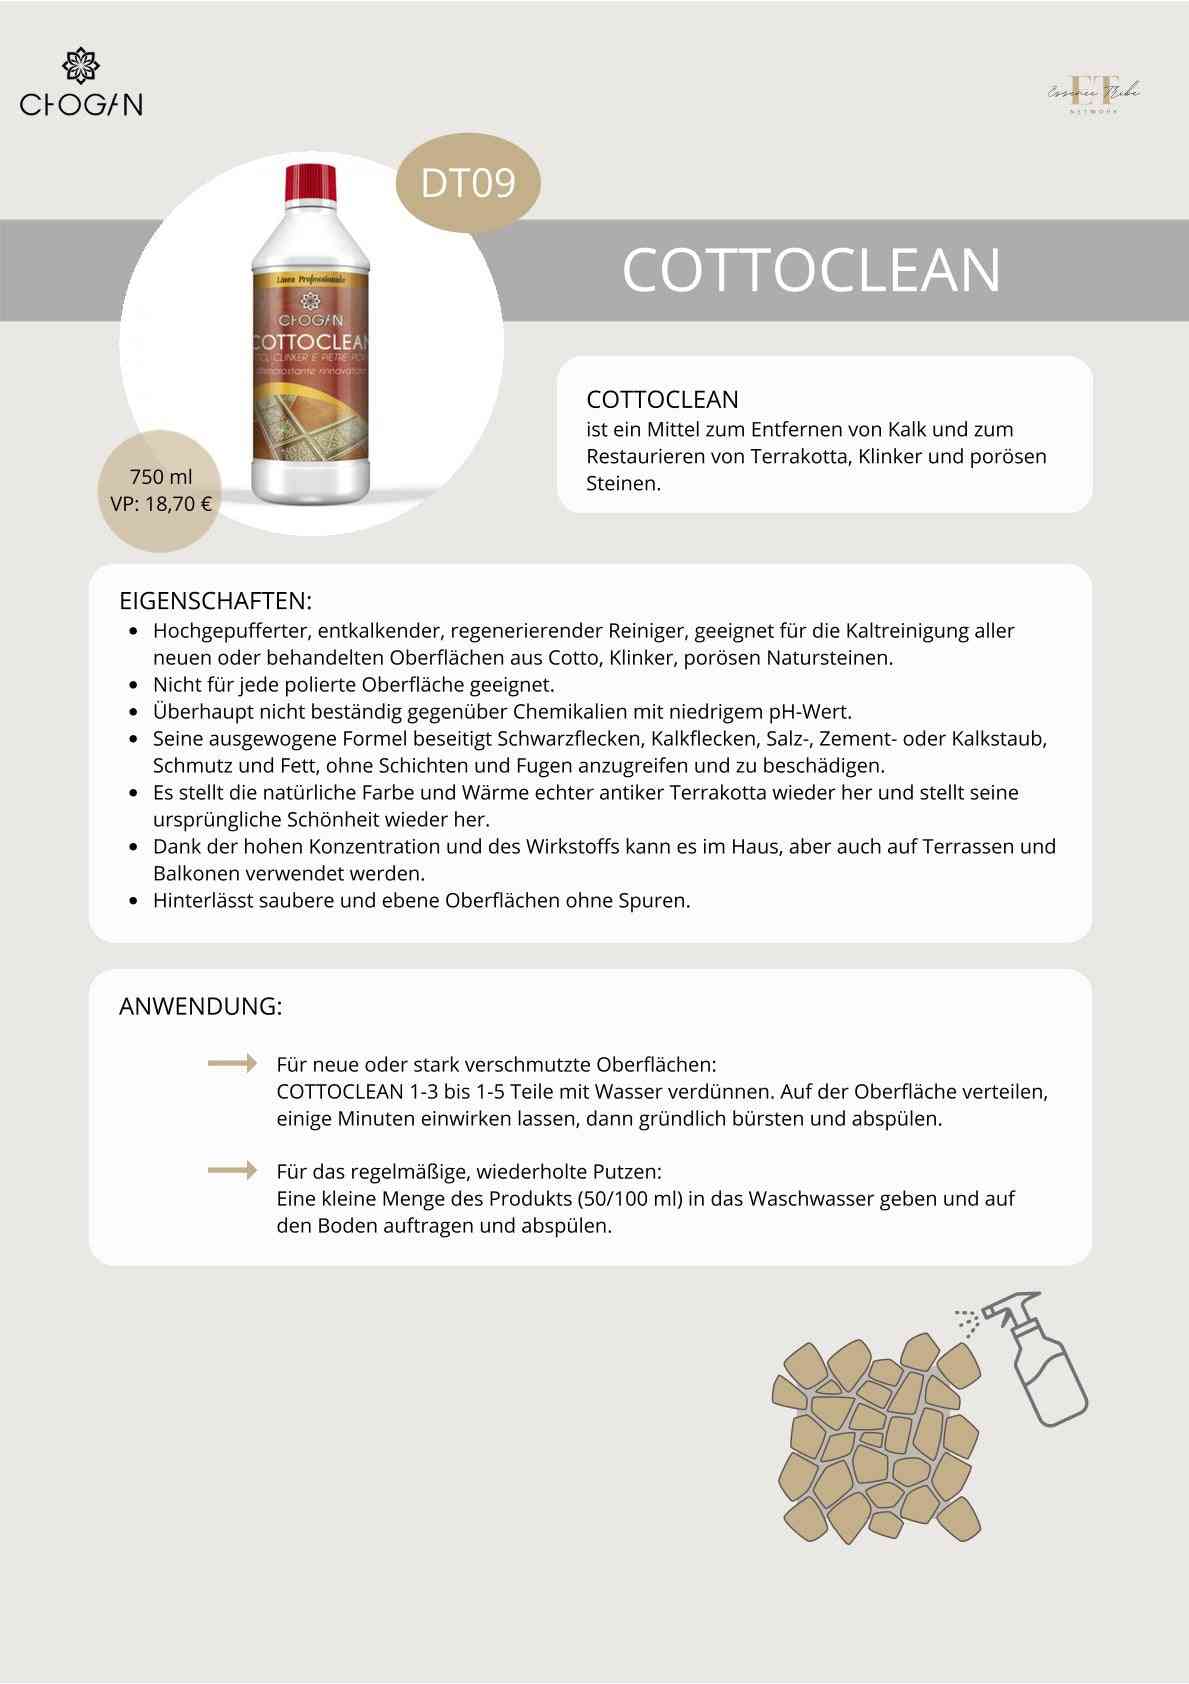 Cottoclean – renovator for terracotta, clinker and porous stones